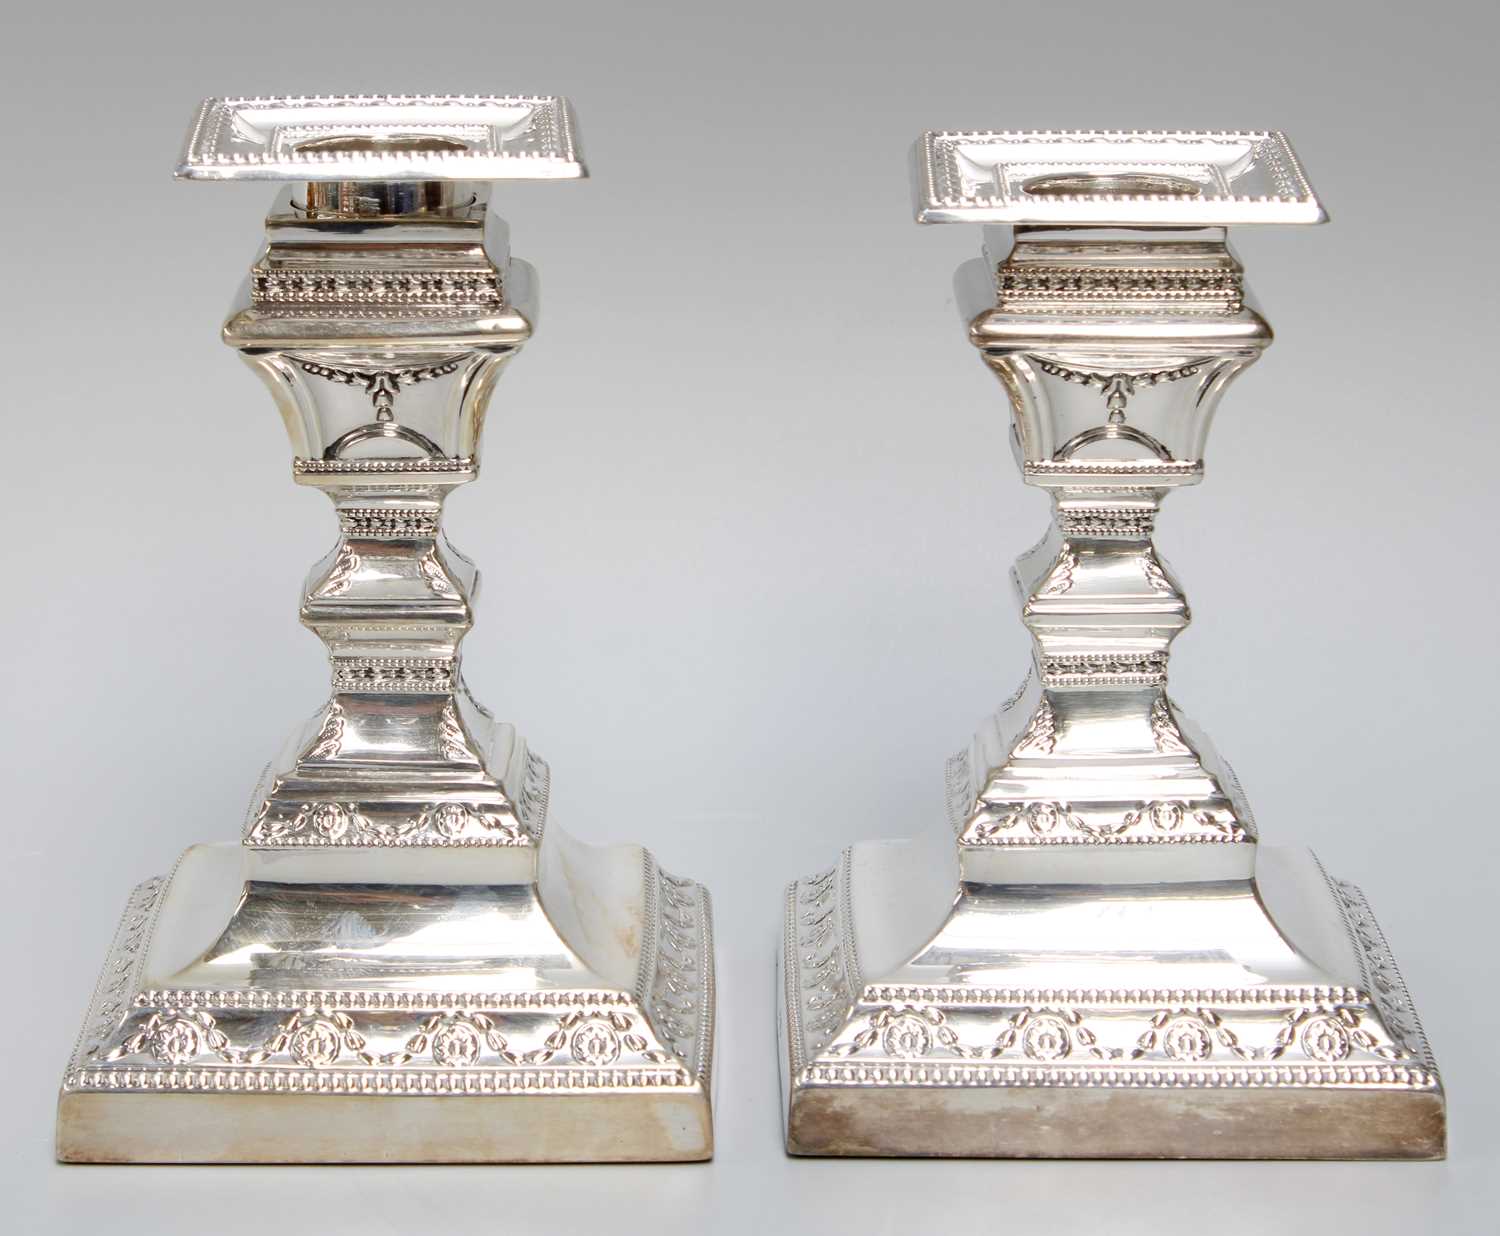 A Pair of Victorian Silver Candlesticks, by Henry Wilkinson and Co., London, 1891, on square base